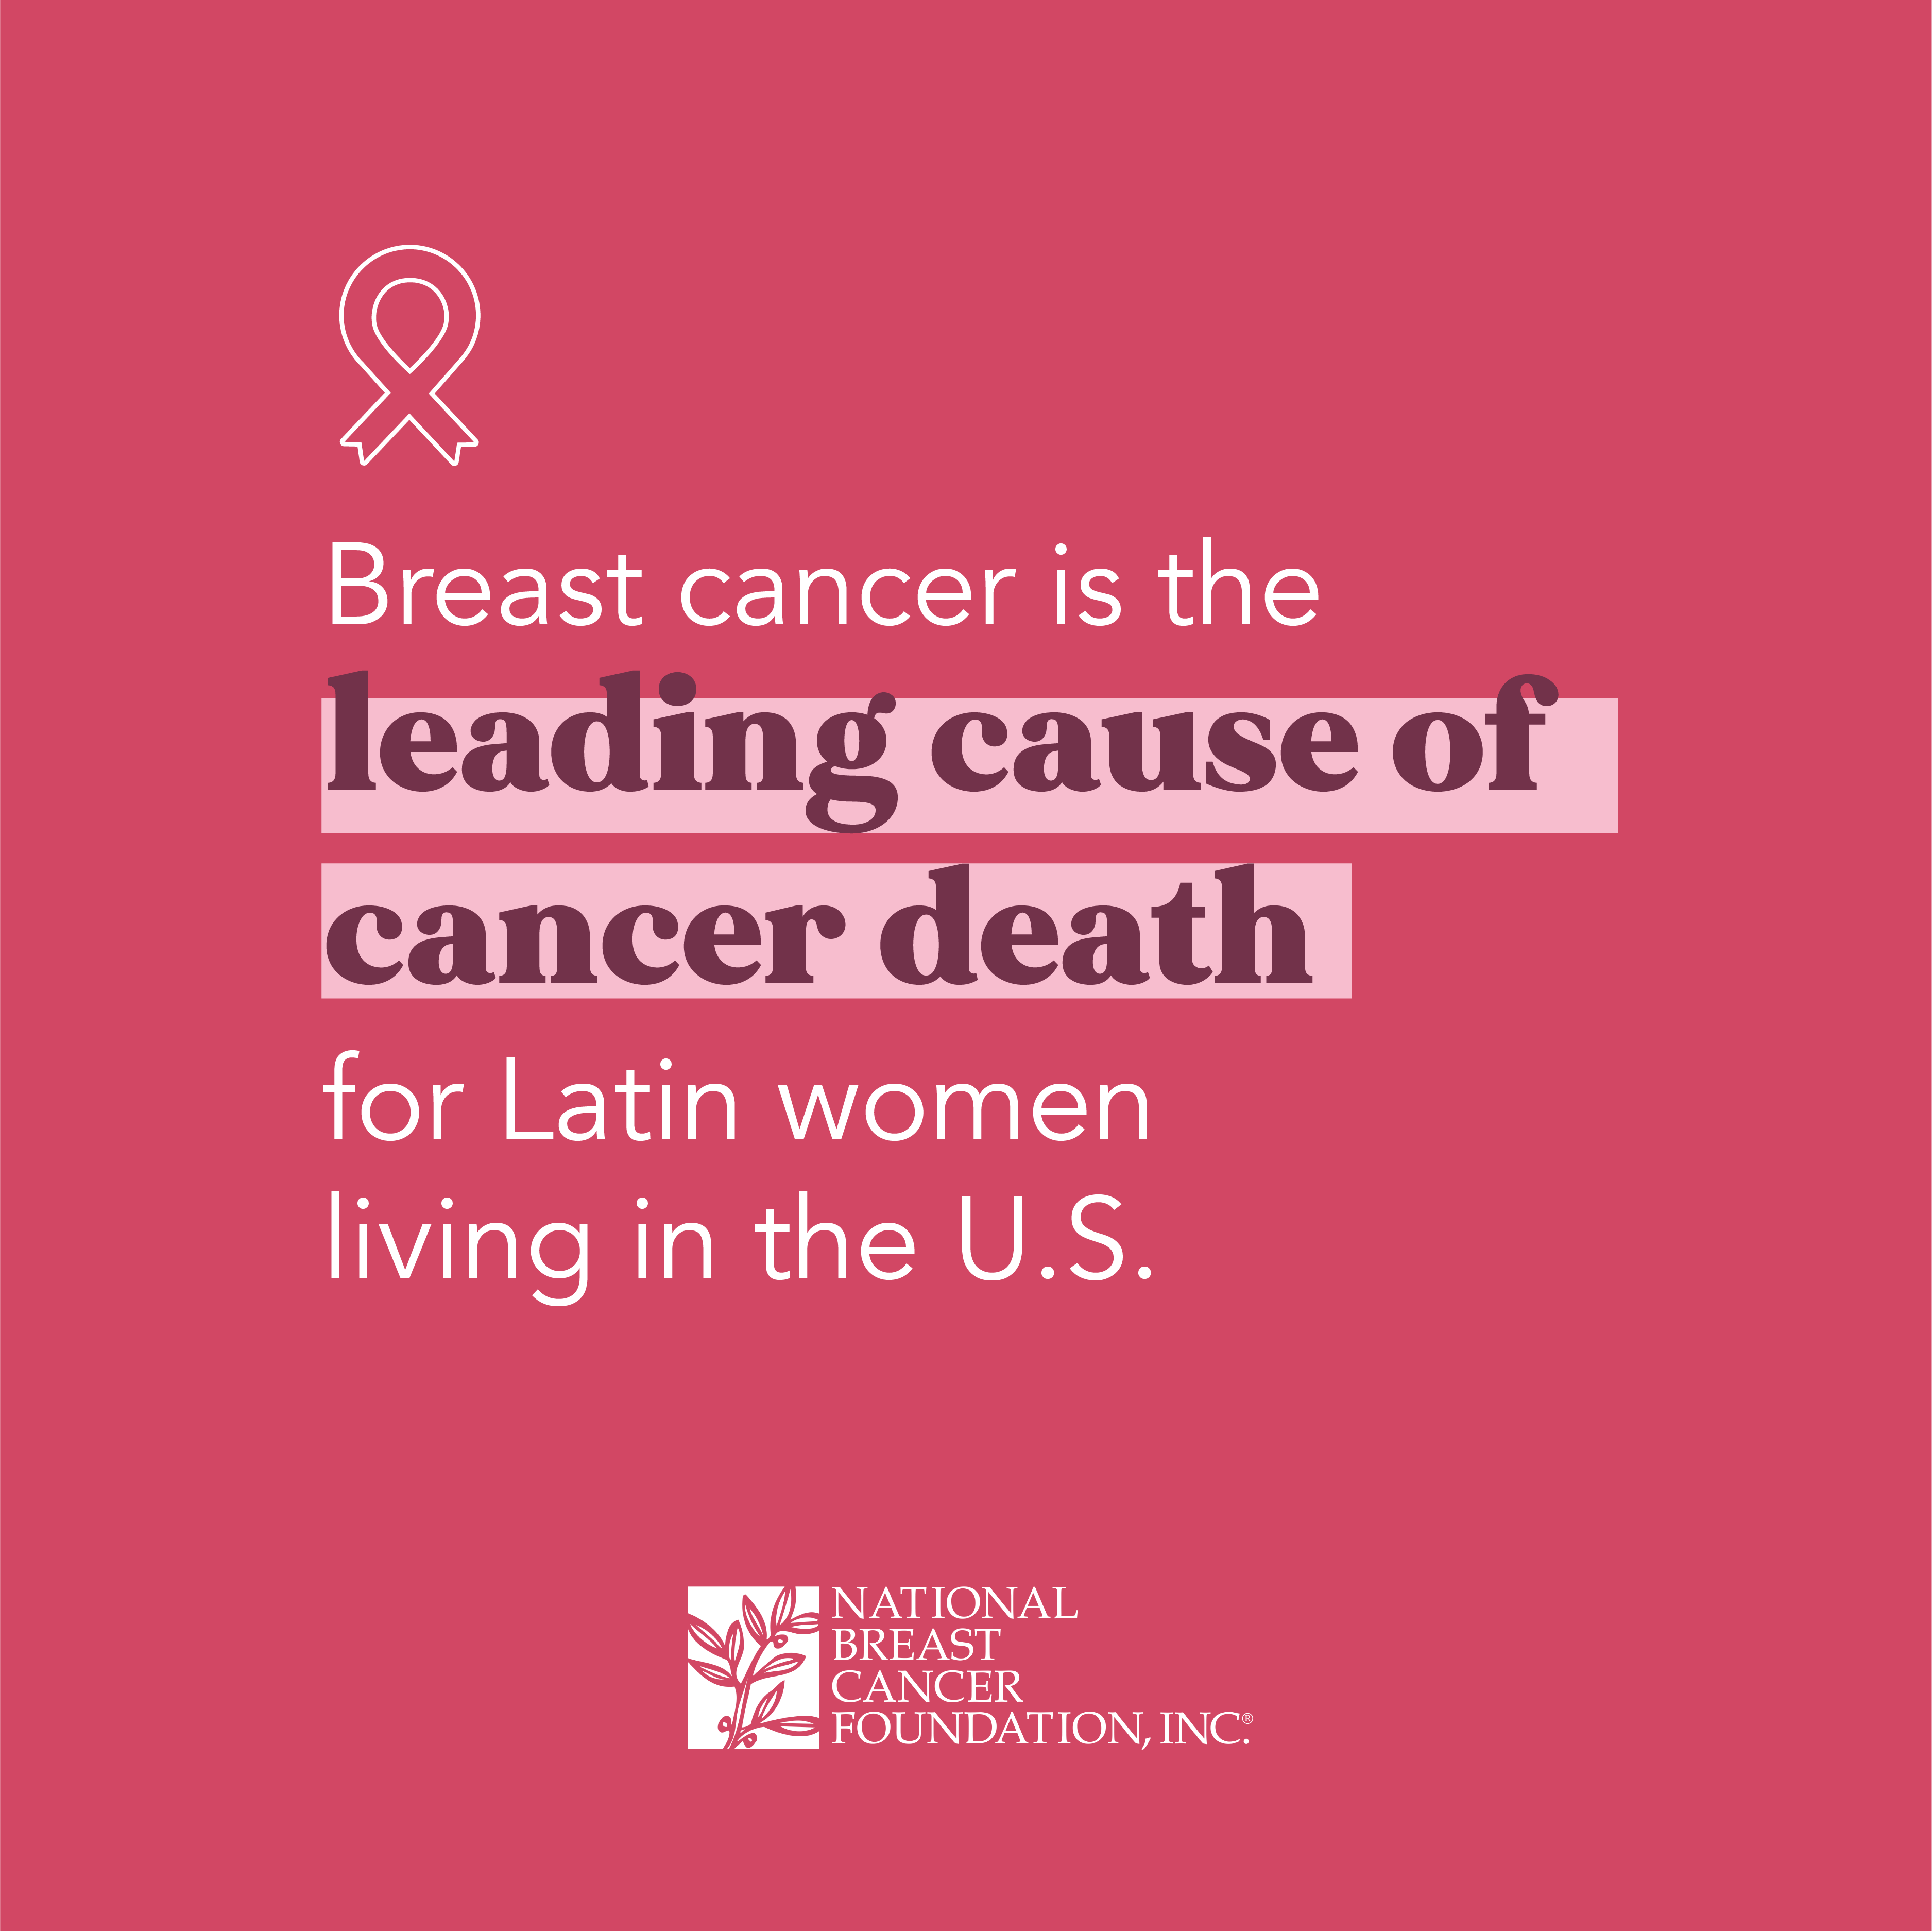 Breast Cancer is the leading cause of cancer death for Latin women living in the U.S.